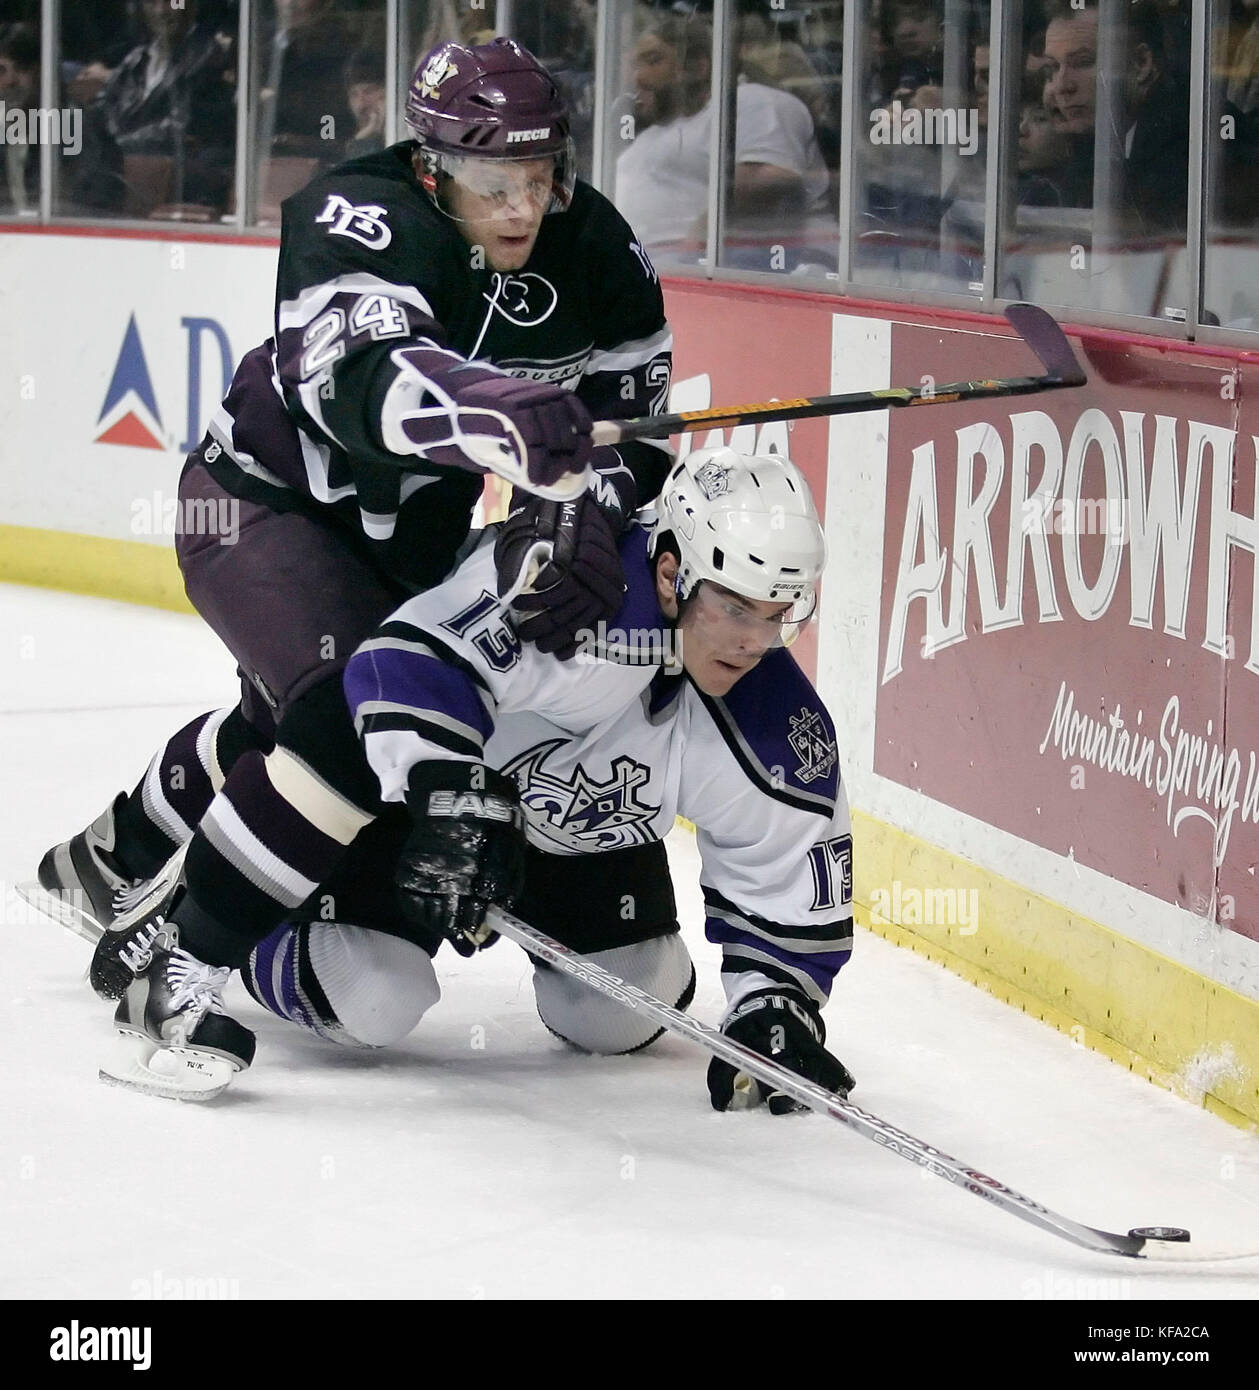 Anaheim Mighty Ducks' Ruslan Salei of Belarus, top, pushes Los Angeles Kings' Michael Cammalleri to the ice while trying to get the puck in the first period of an NHL hockey game in Anaheim, Calif. on Tuesday, April 4, 2006. Photo by Francis Specker Stock Photo